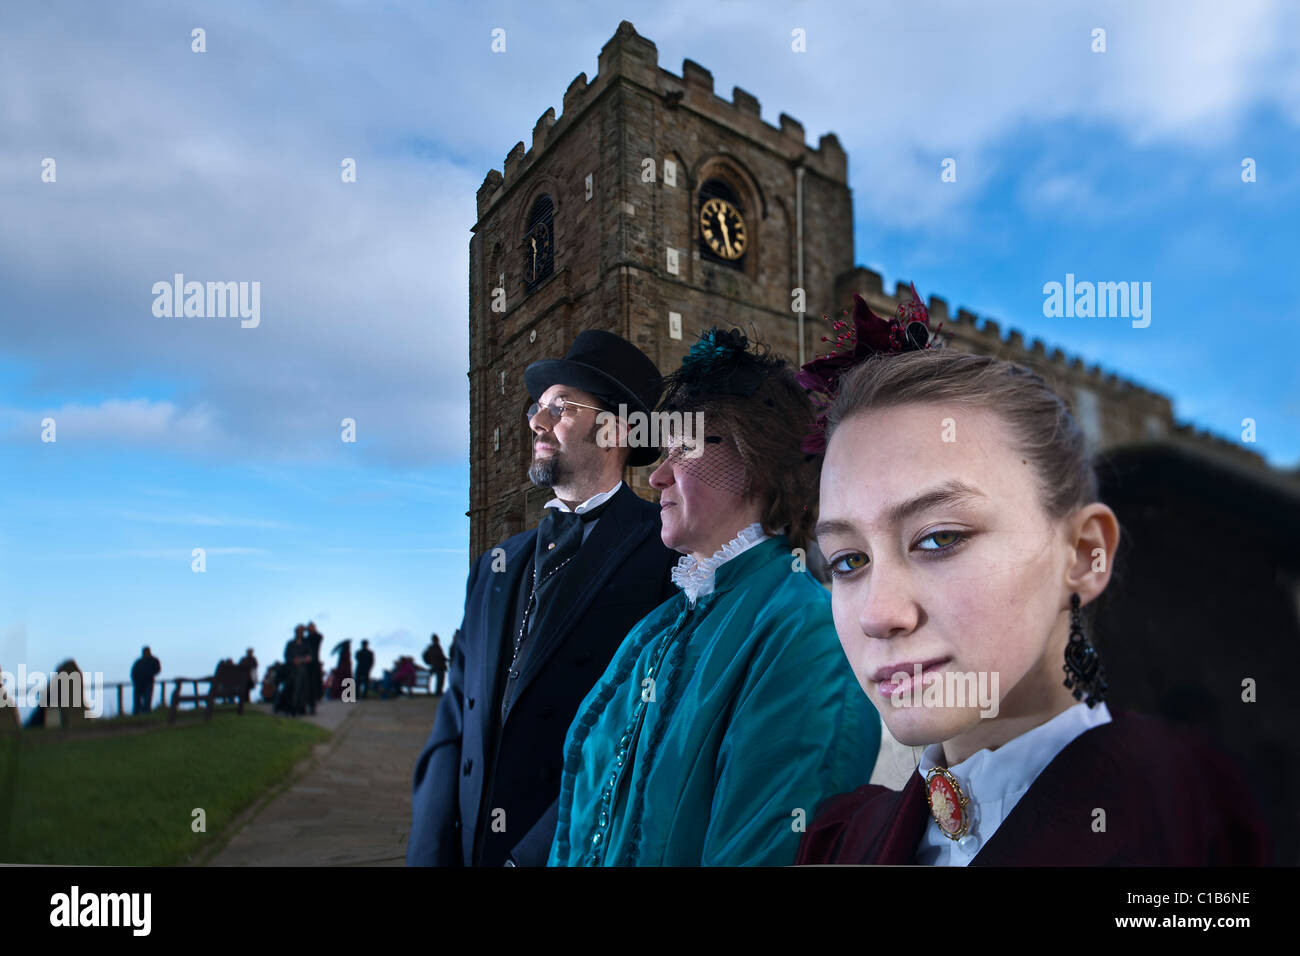 Goths at Whitby Goth weekend. Stock Photo